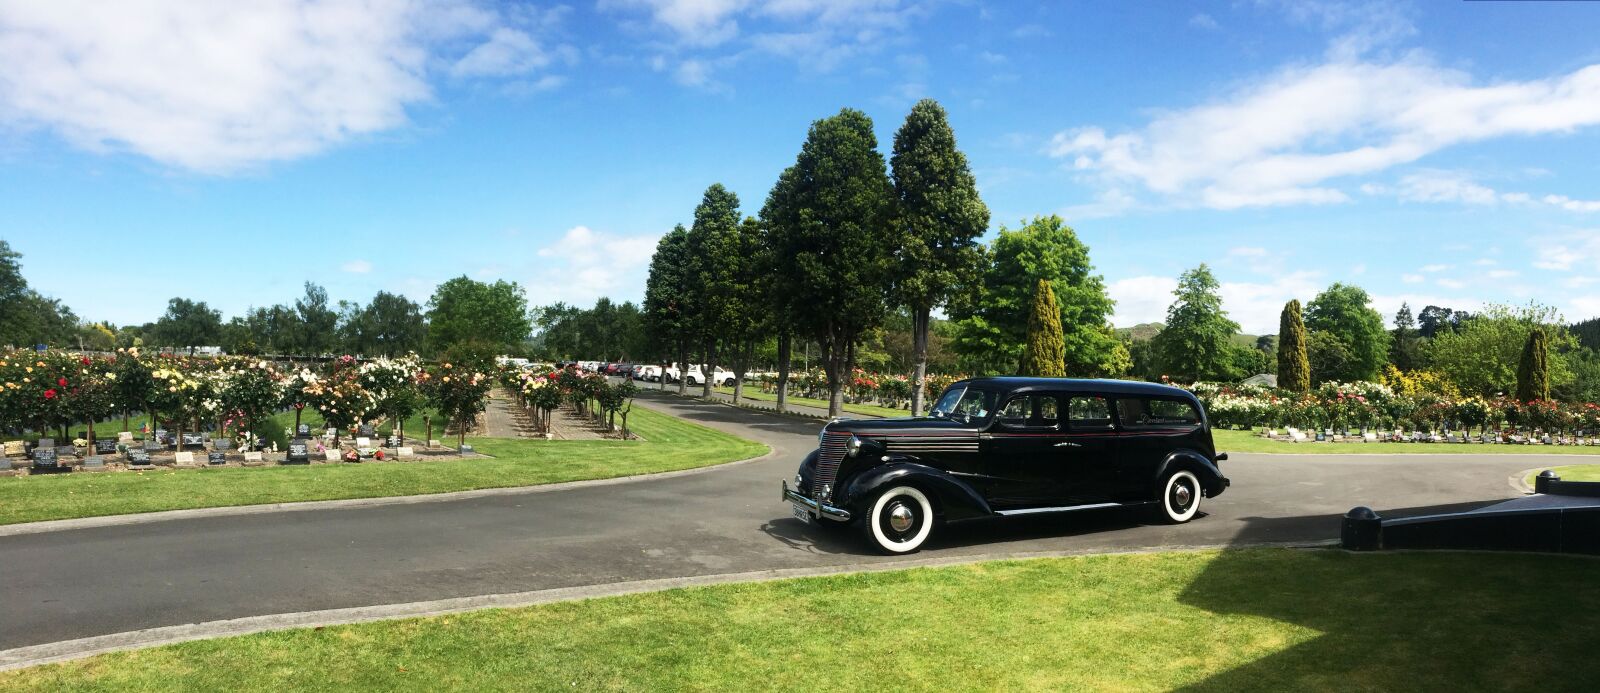 Apple iPhone 5s sample photo. Cemetery, vintage hearse, funeral photography